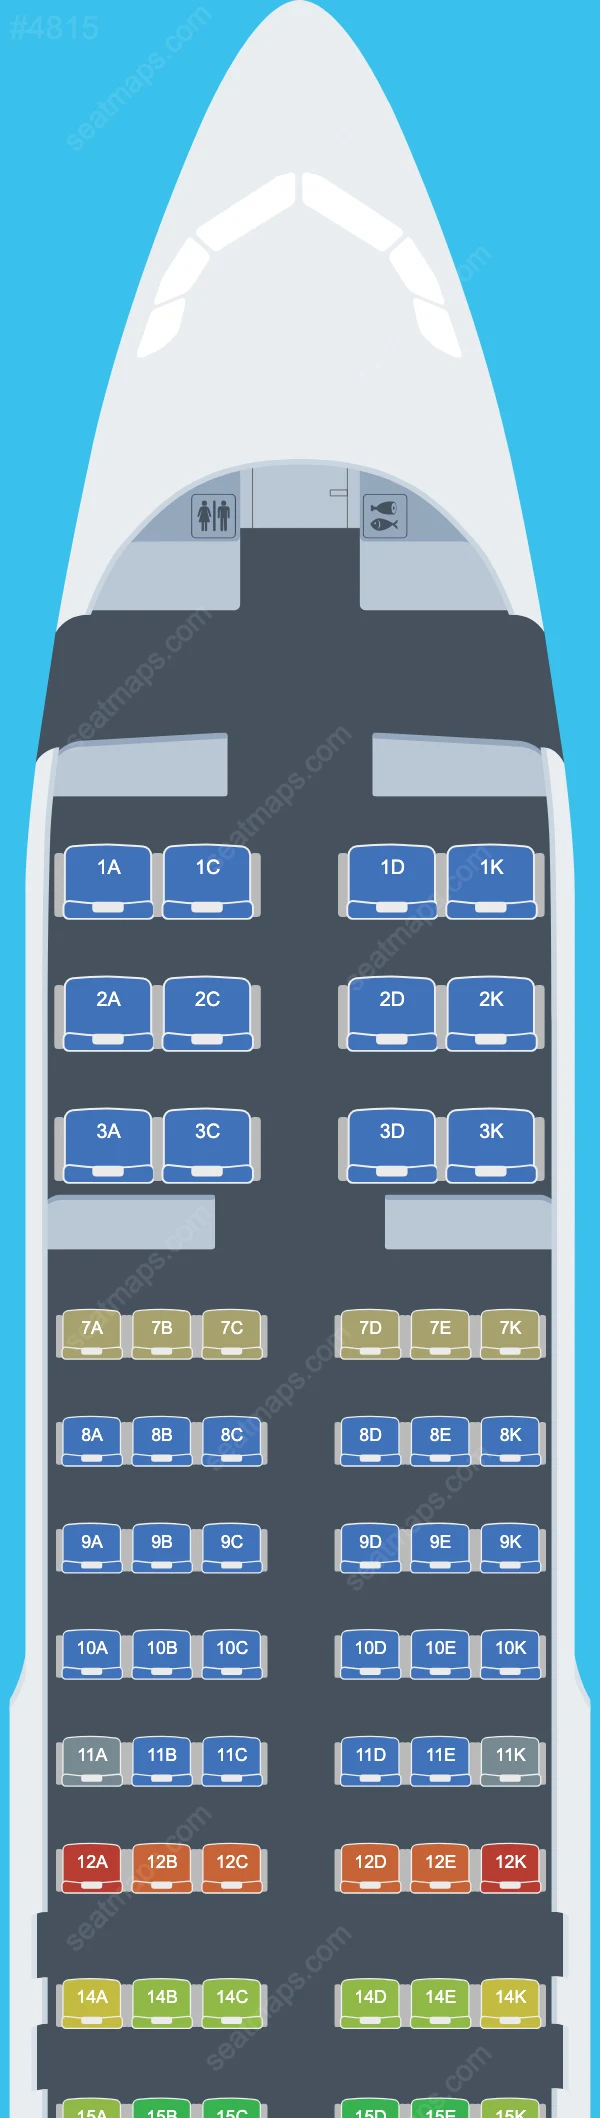 Avianca Airbus A320 Seat Maps A320-200 V.3